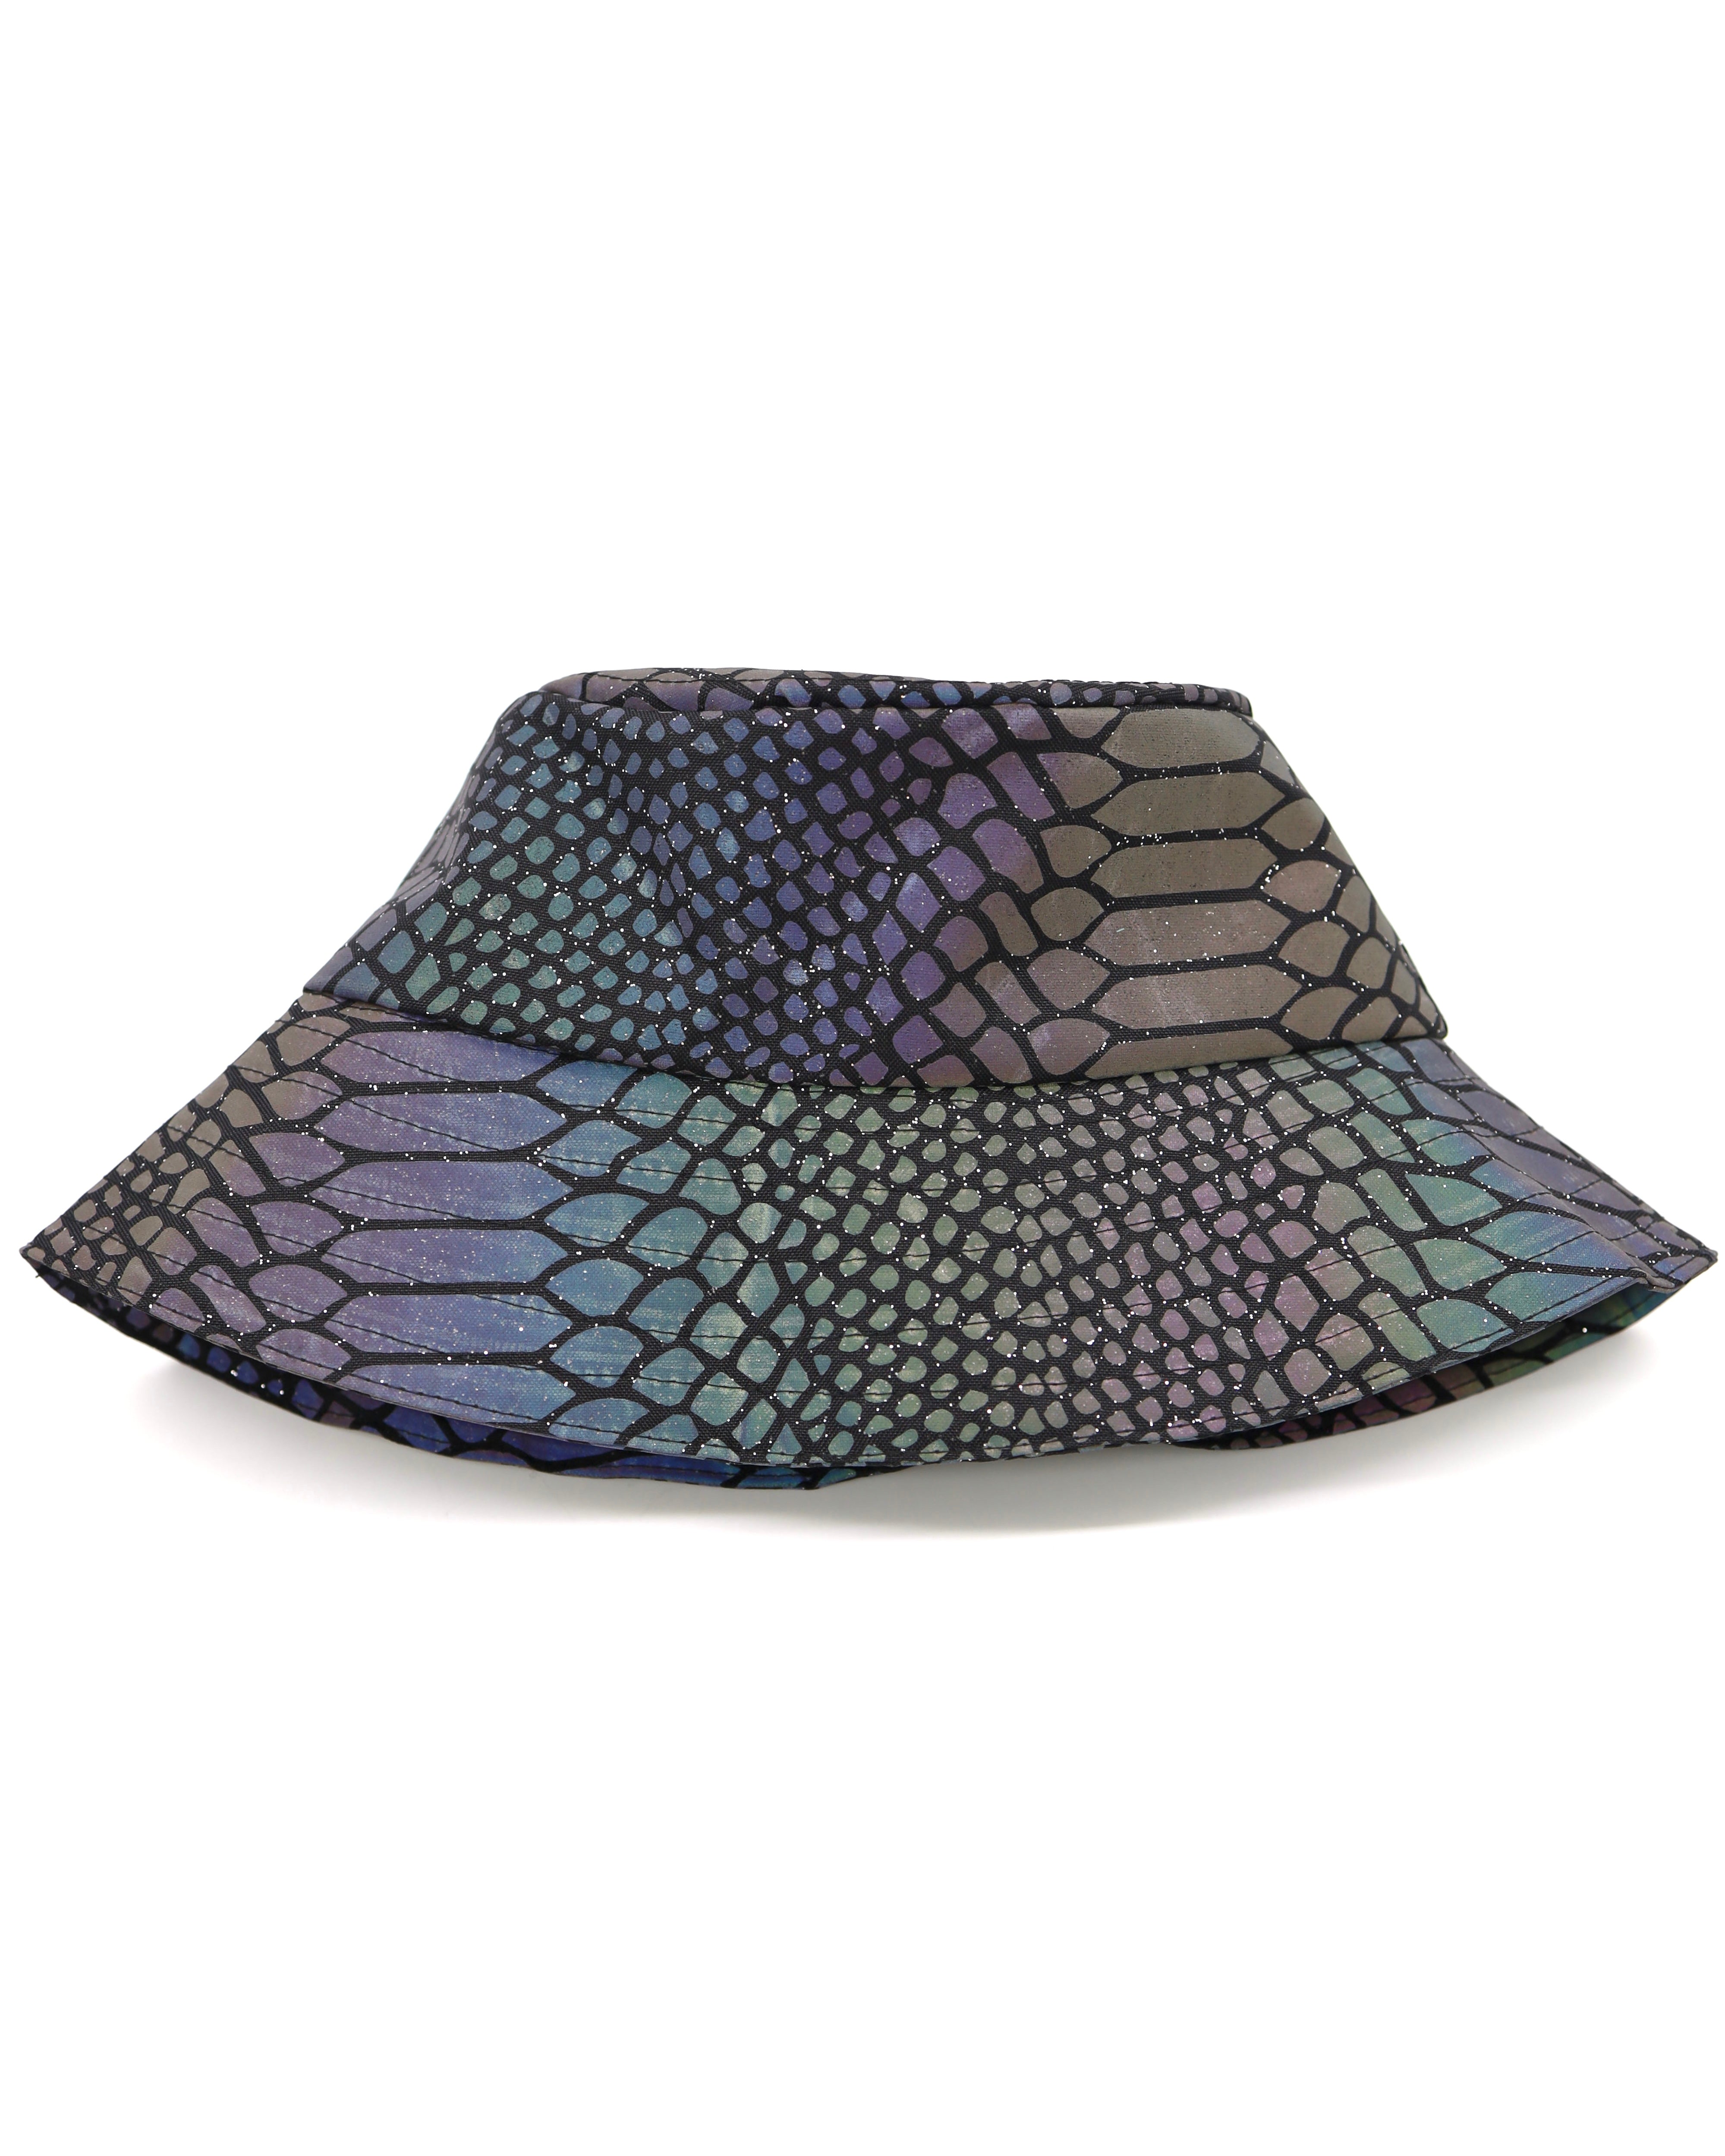 Dragonfly Reflective Bucket Hat, Bucket Hat, - One Stop Rave